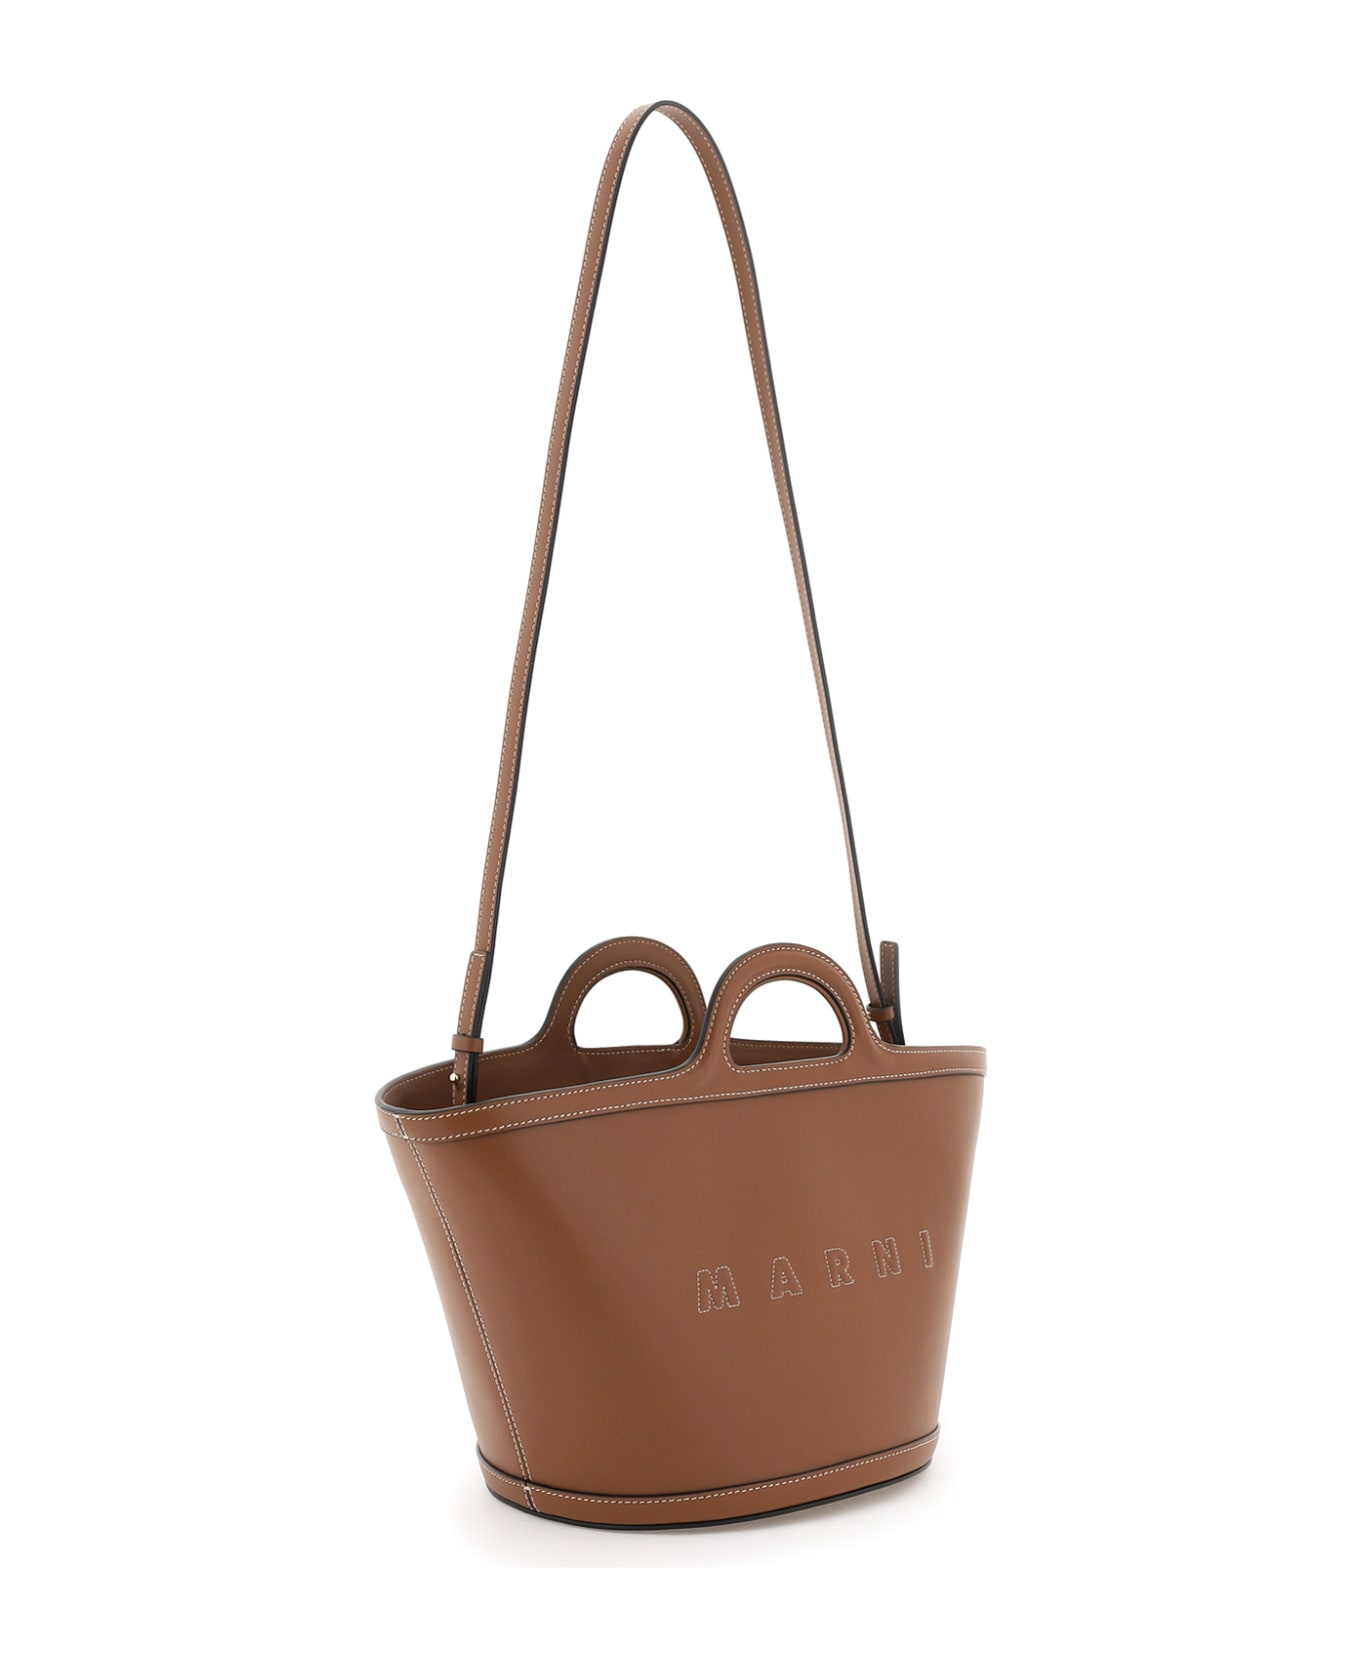 Marni Tropicalia Small Bag In Brown Leather - 00M29 トートバッグ